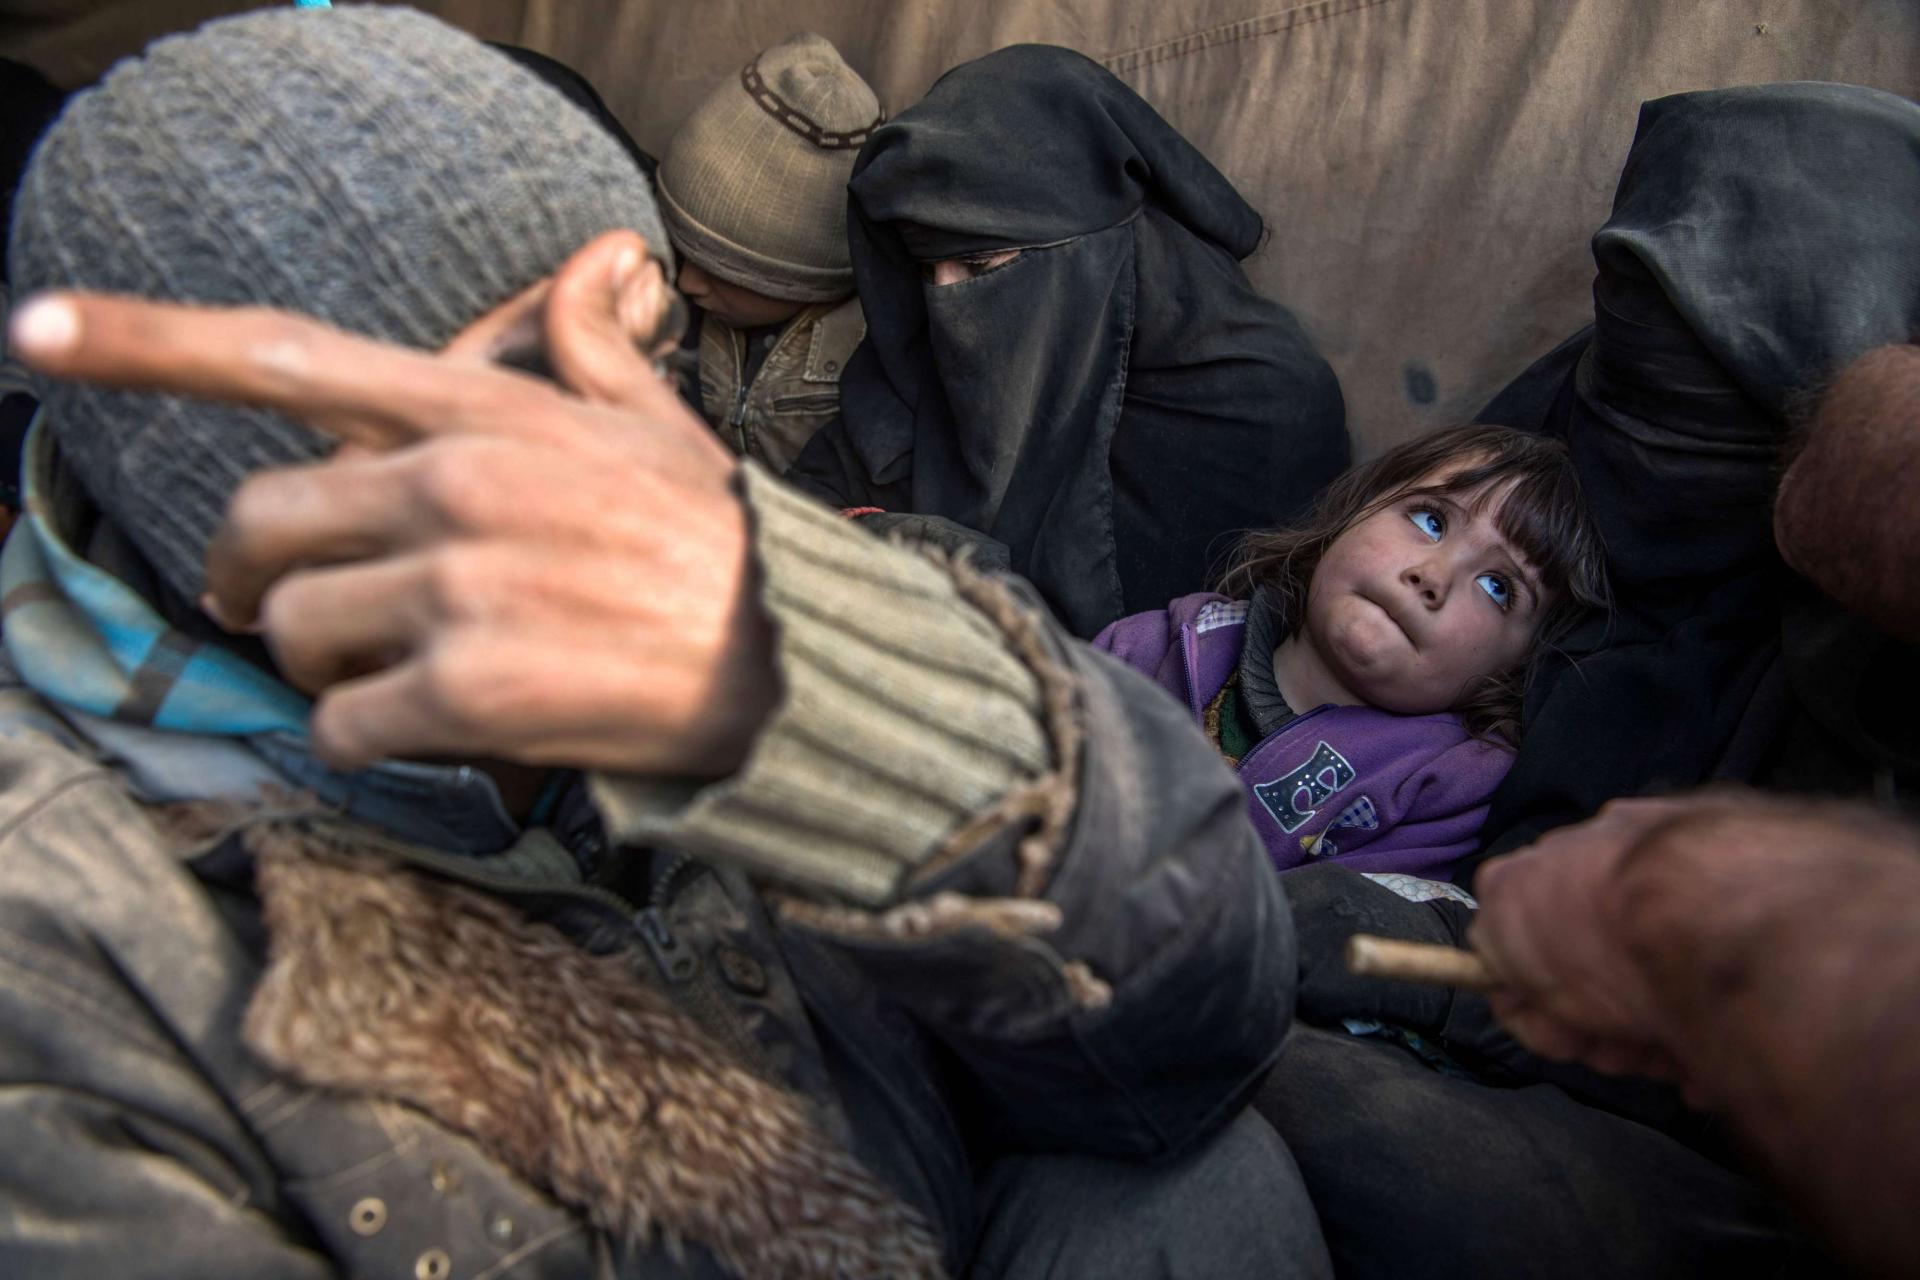 Women and children displaced from Deir Ezzor sit in the back of a truck after they fled the Islamic State (IS) holdout near Baghuz, eastern Syria, on February 11, 2019.